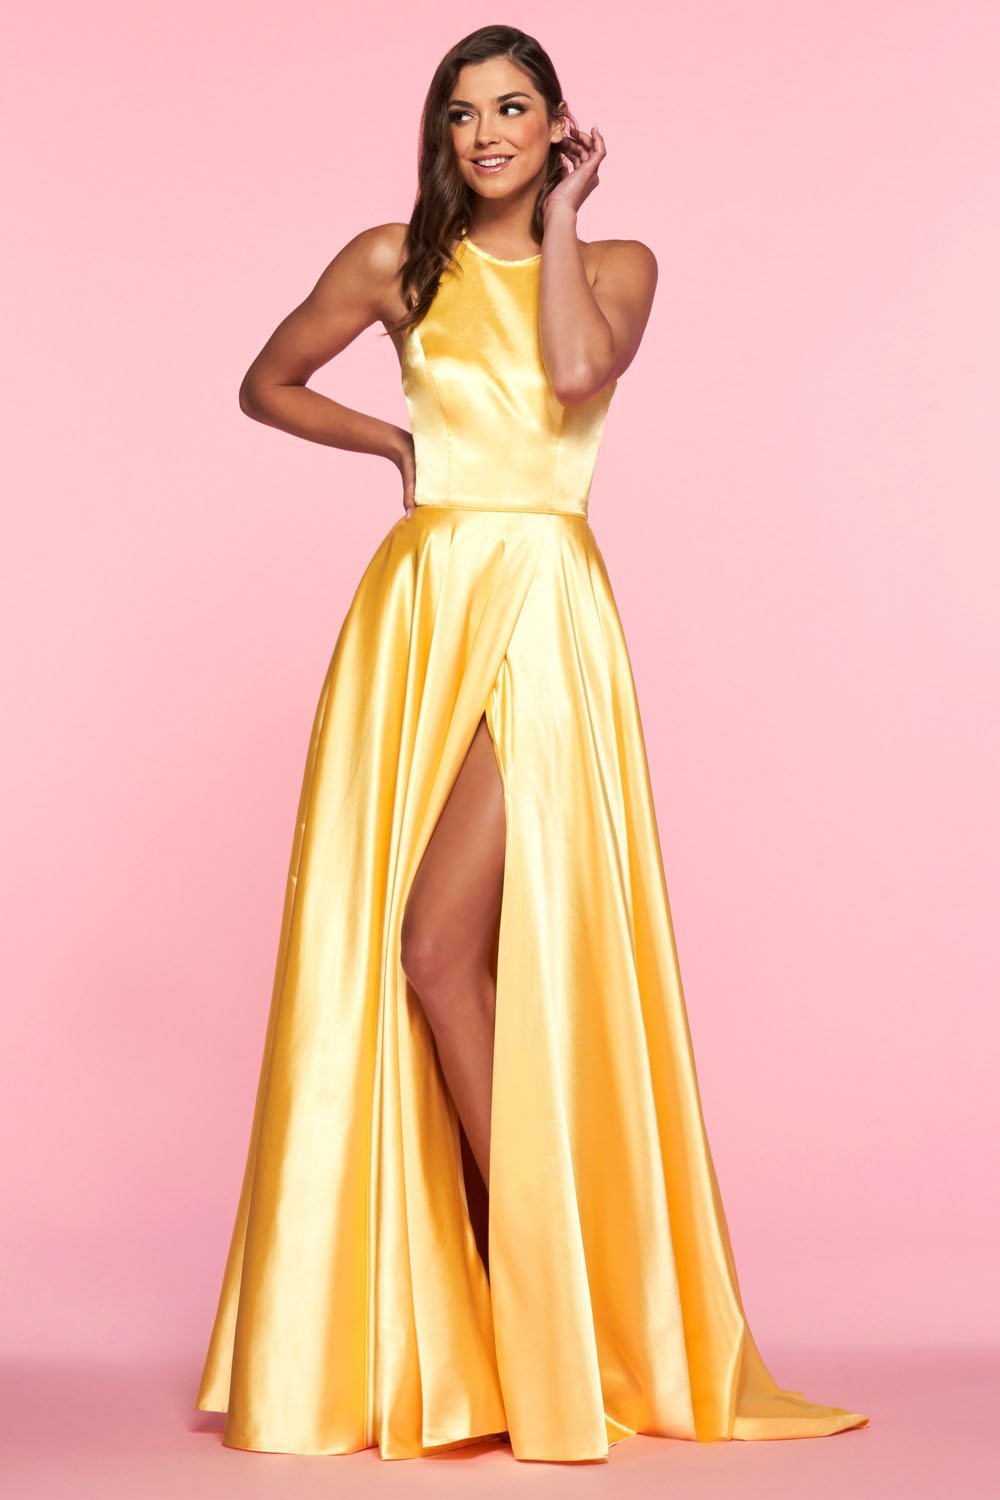 Sherri Hill 53875 dress images in these colors: Royal, Red, Rose, Yellow, Light Blue.